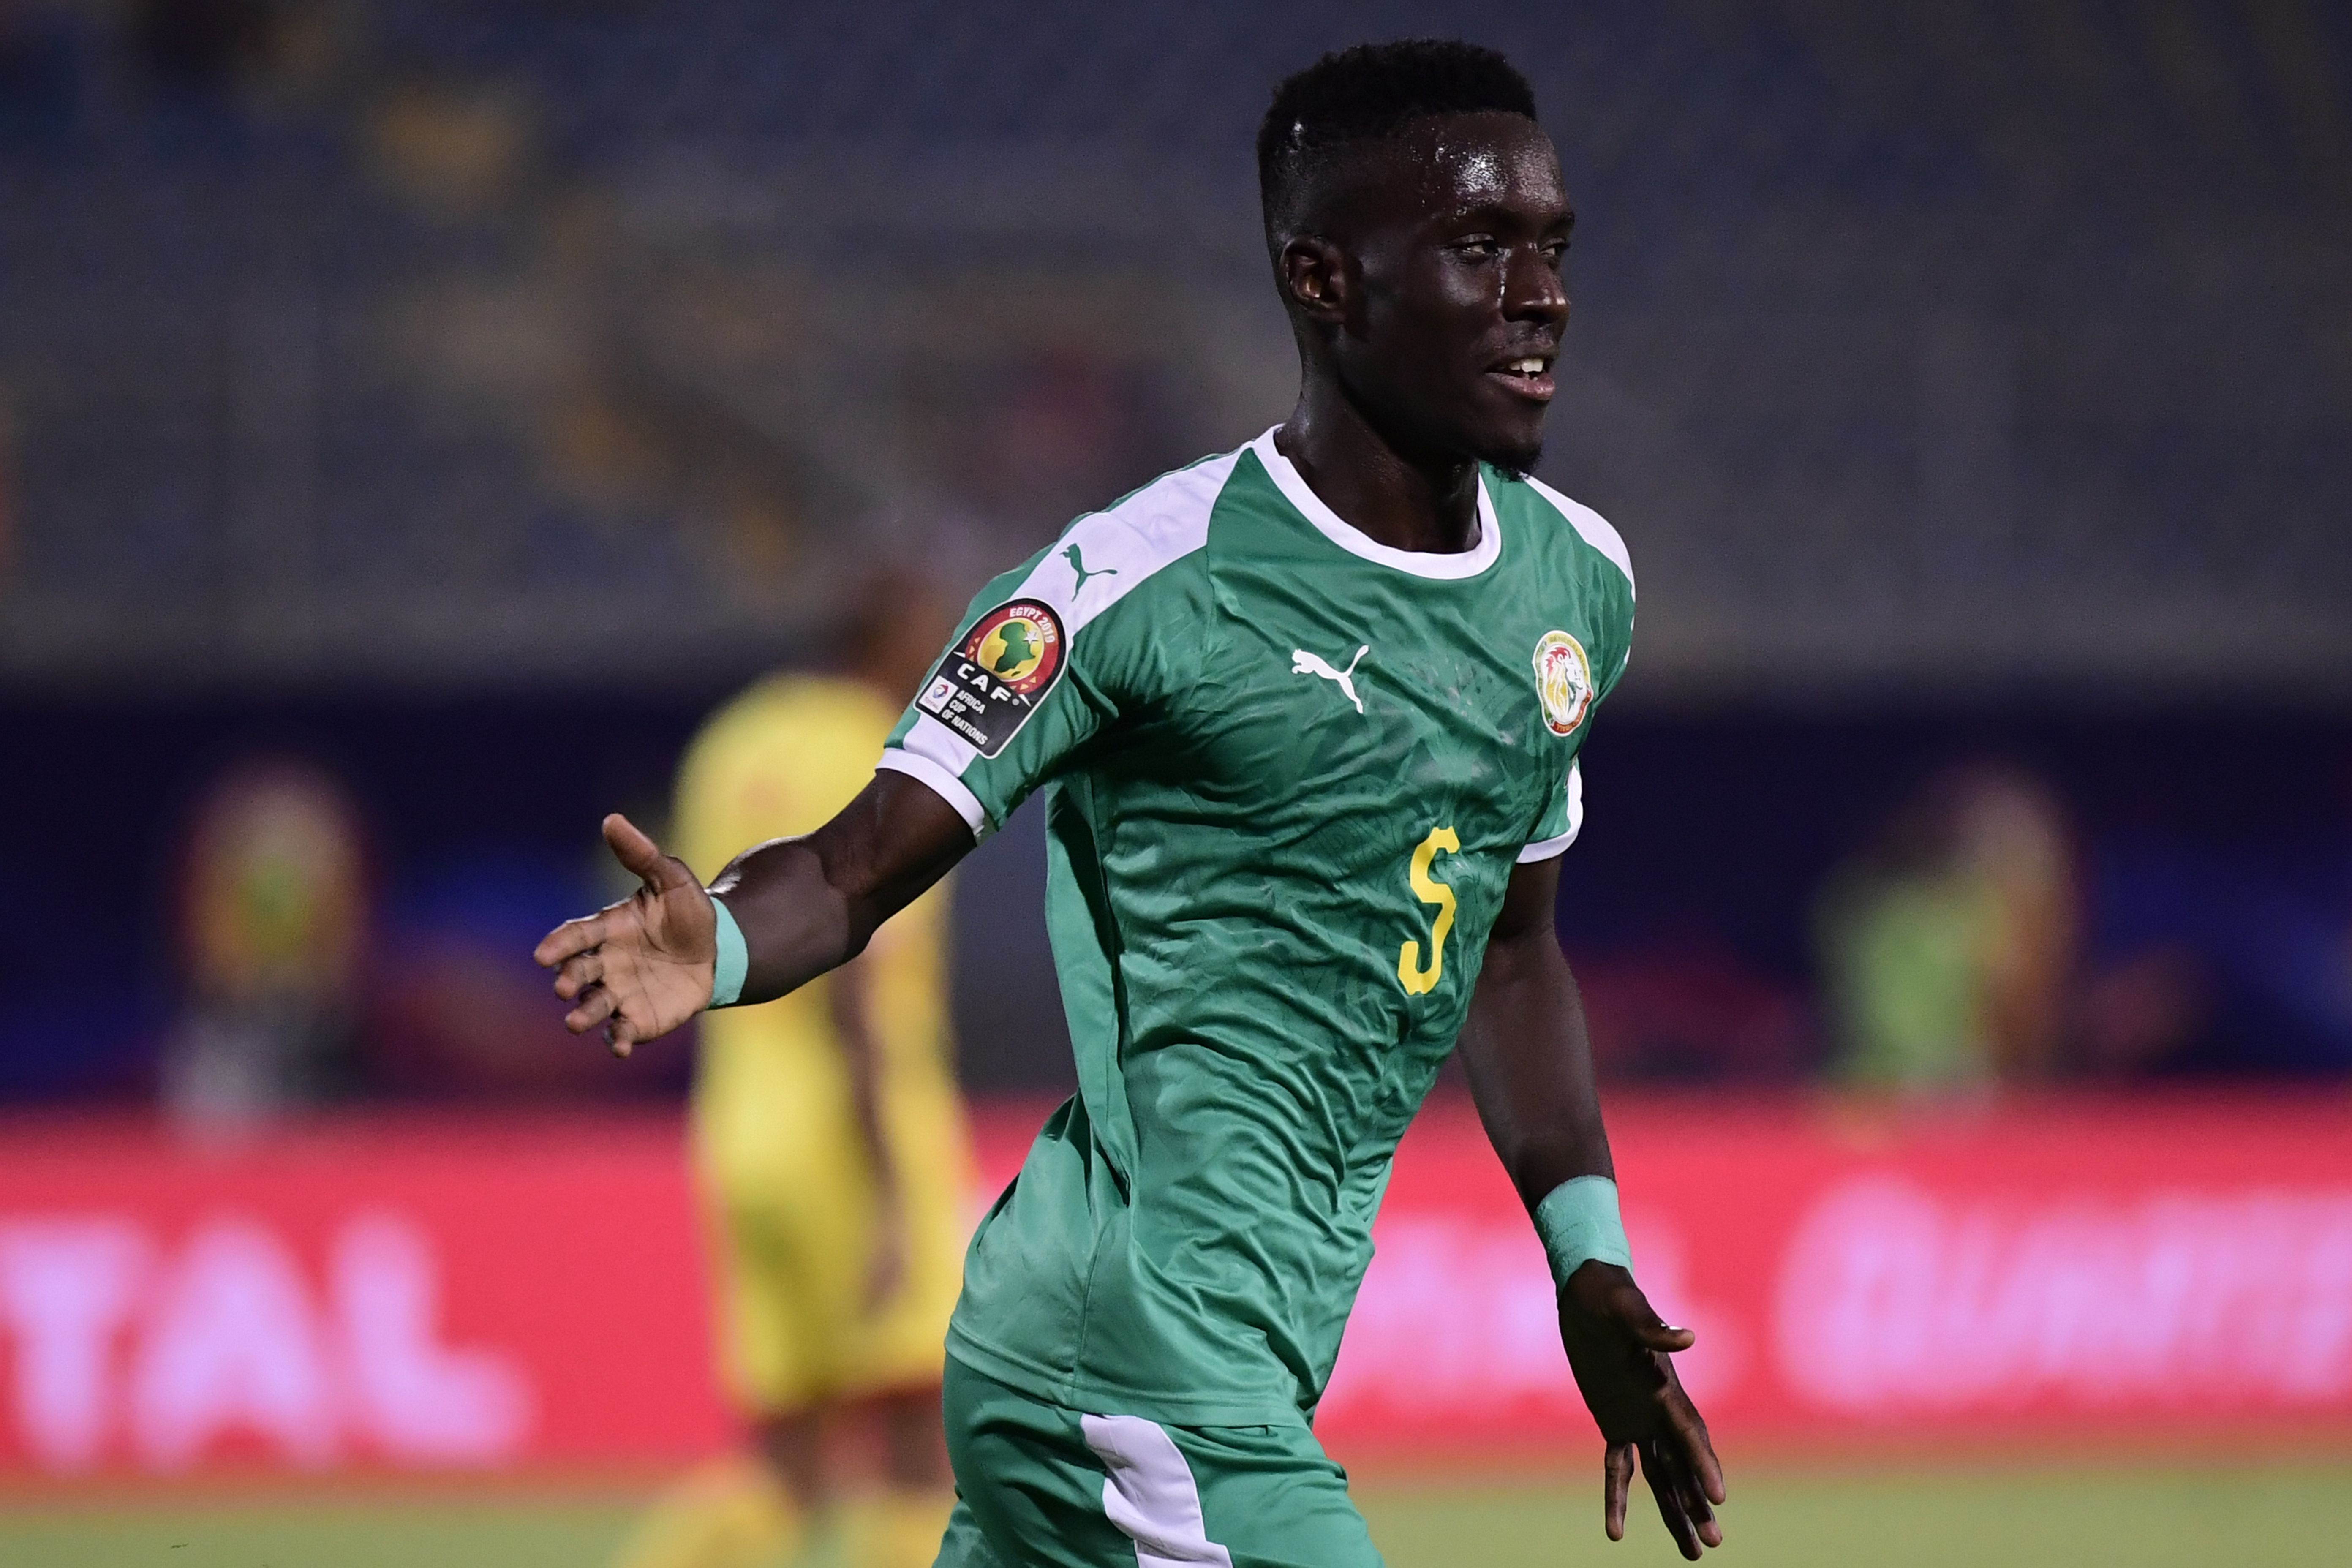 Manchester United were keen on Idrissa Gueye earlier this summer but failed to push home a deal for the veteran midfielder